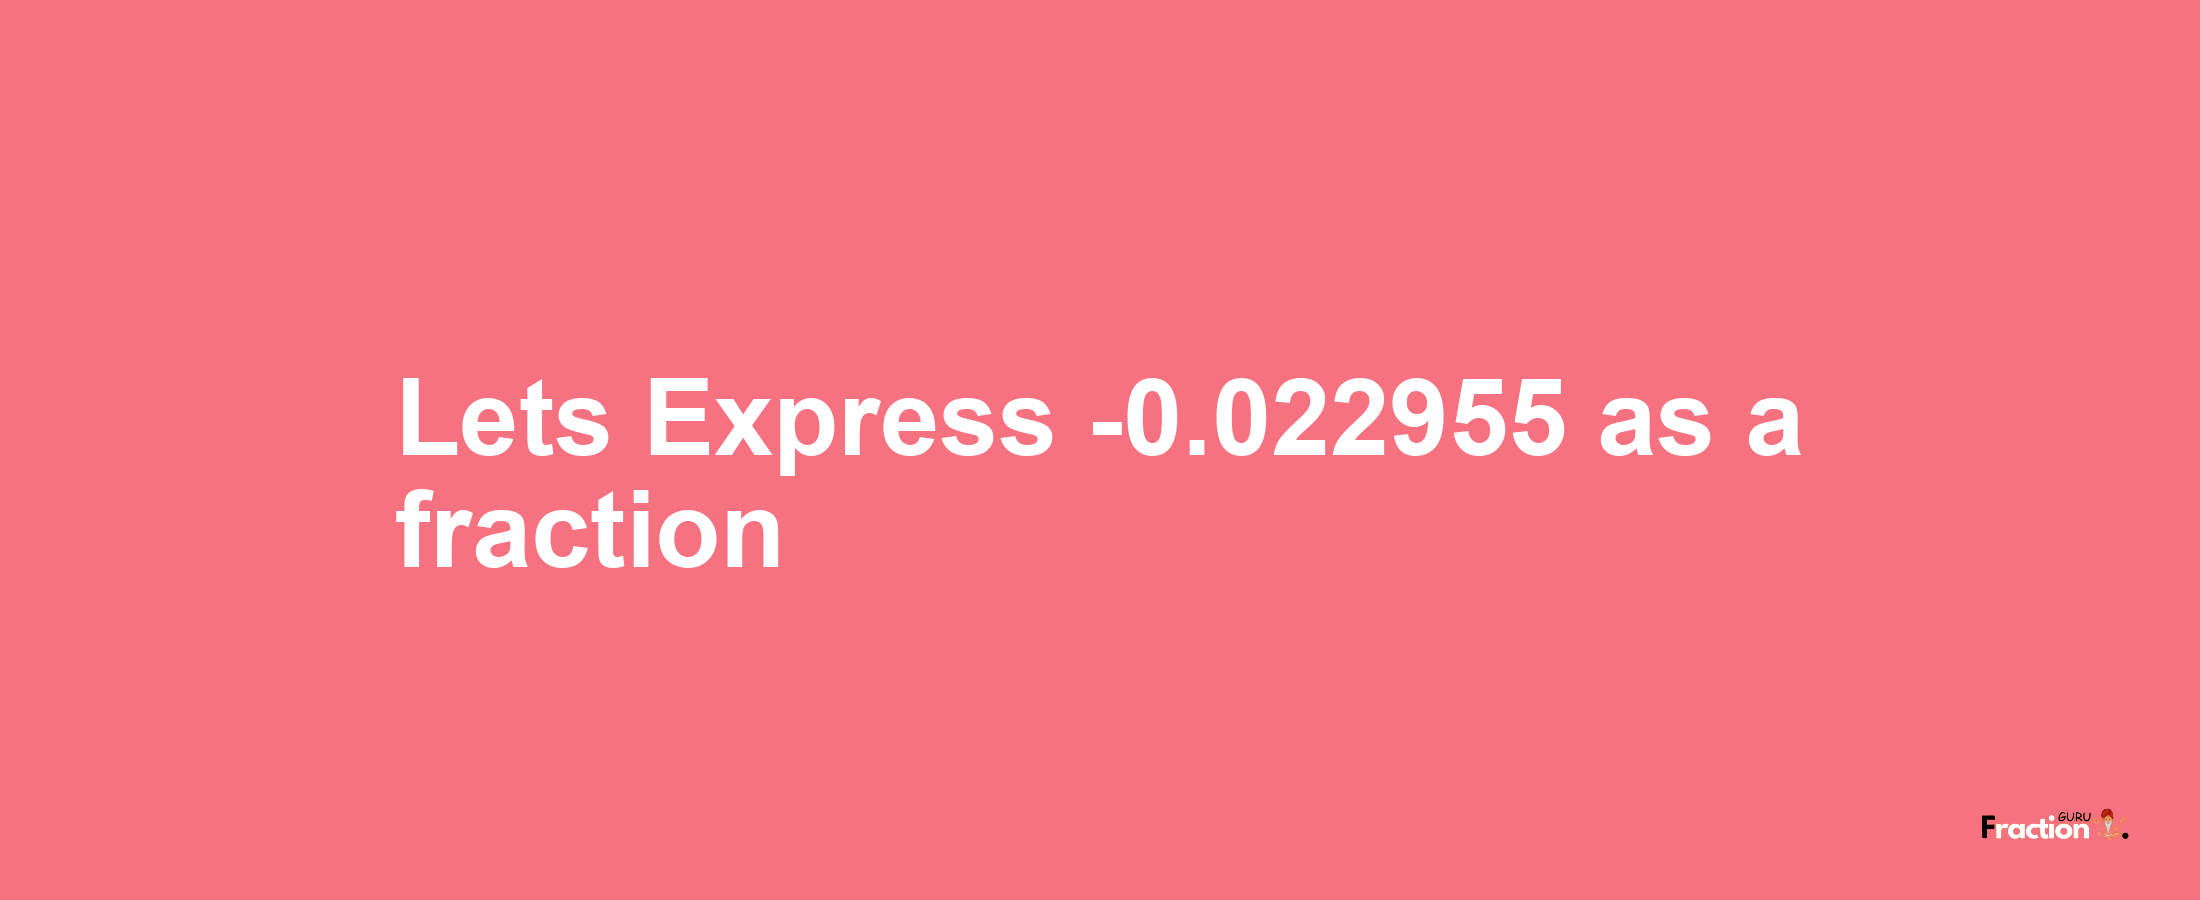 Lets Express -0.022955 as afraction